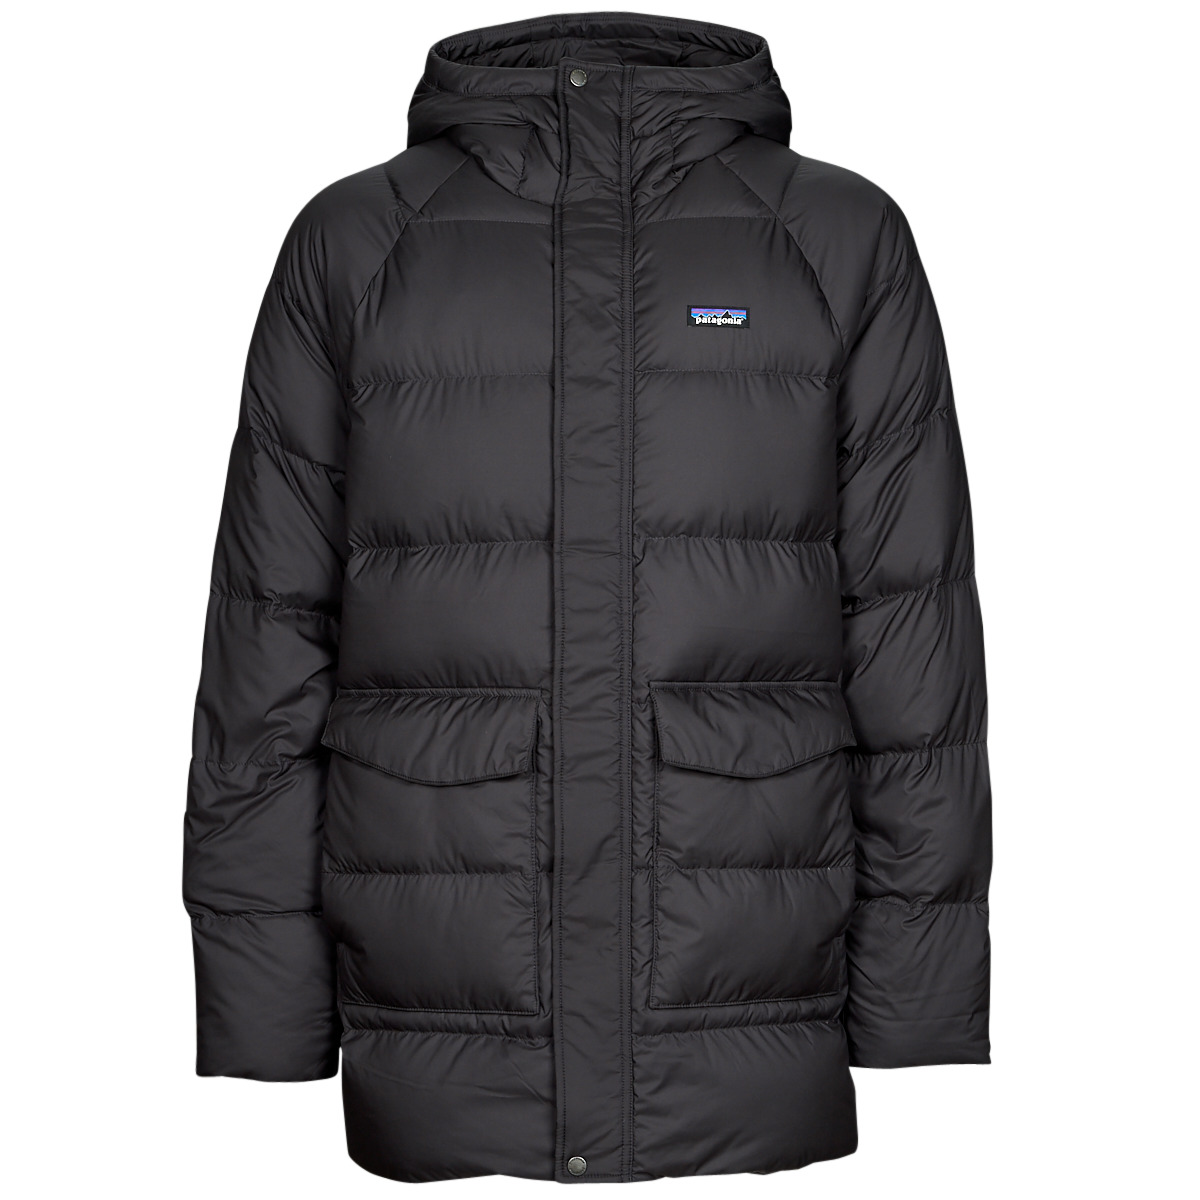 Patagonia silent down parka. $142. And more from Patagonia marmot etc :  r/frugalmalefashion